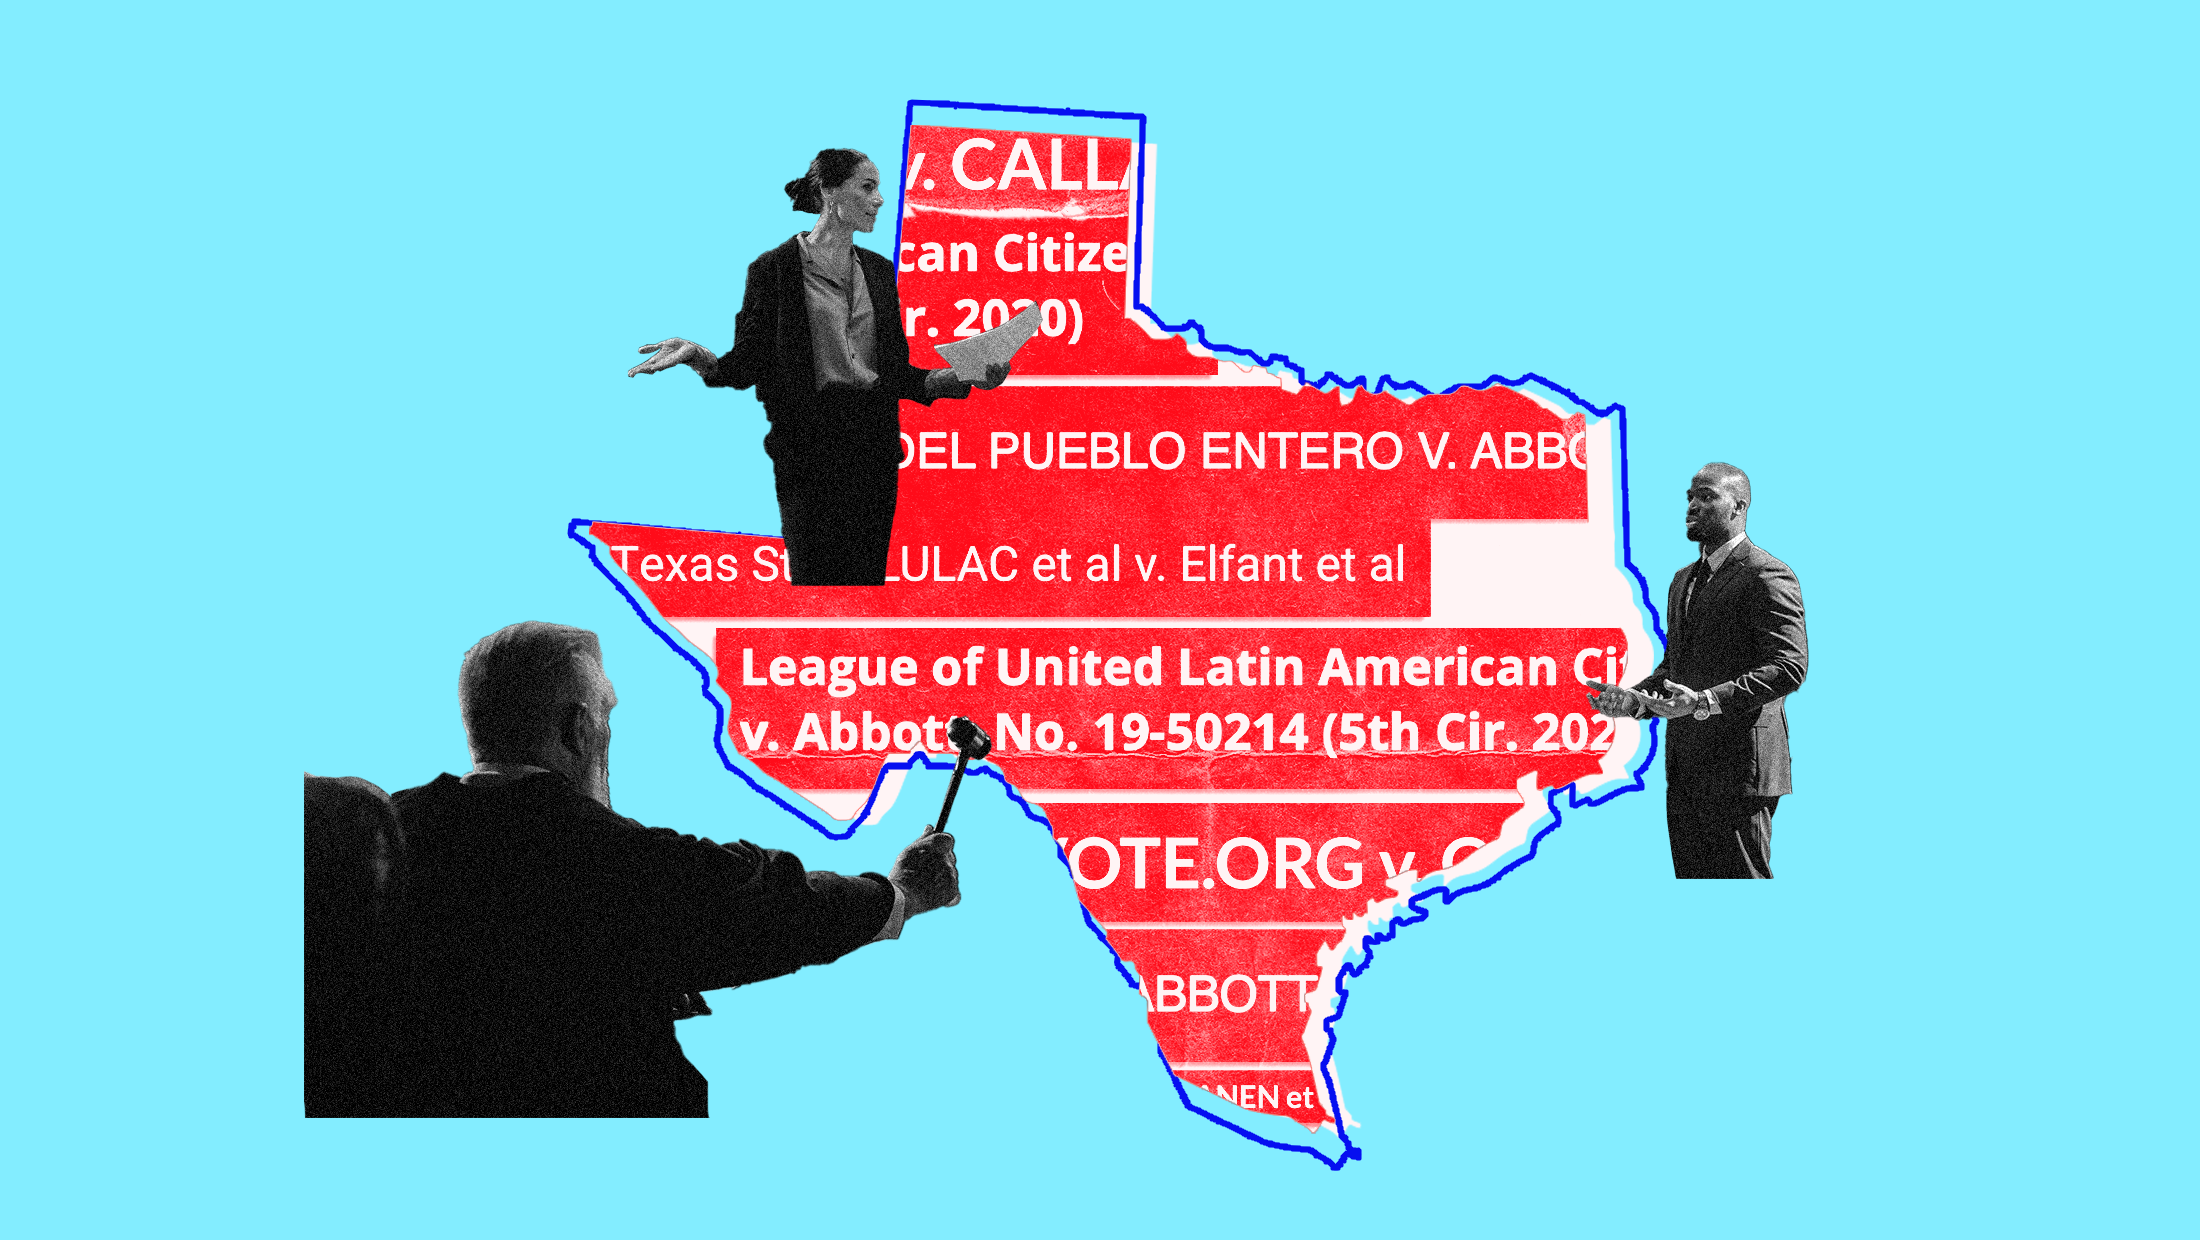 A dark blue outline of Texas on a light blue background with red cutout titles of case filling the outline. Three figures, a judge and two lawyers, are arranged around the outline.